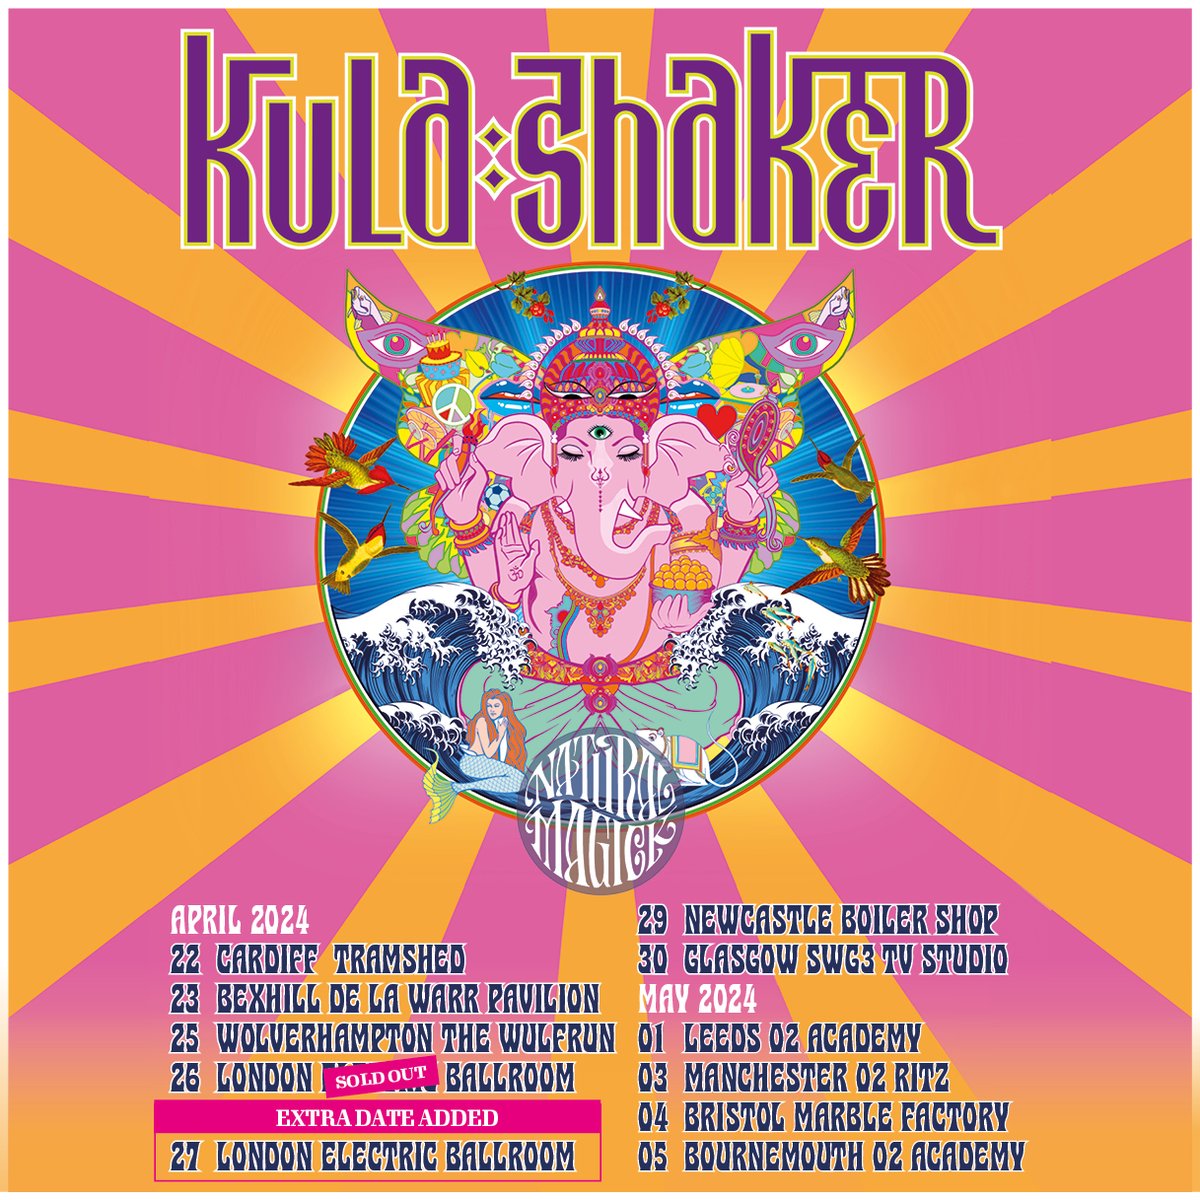 After releasing their first record with their original line-up in decades, we’re thrilled to bring the classic @kulashaker bill here next Monday 29 April: bit.ly/3UdT44W Volume UP for a taster of what’s to come: spoti.fi/449lOz1